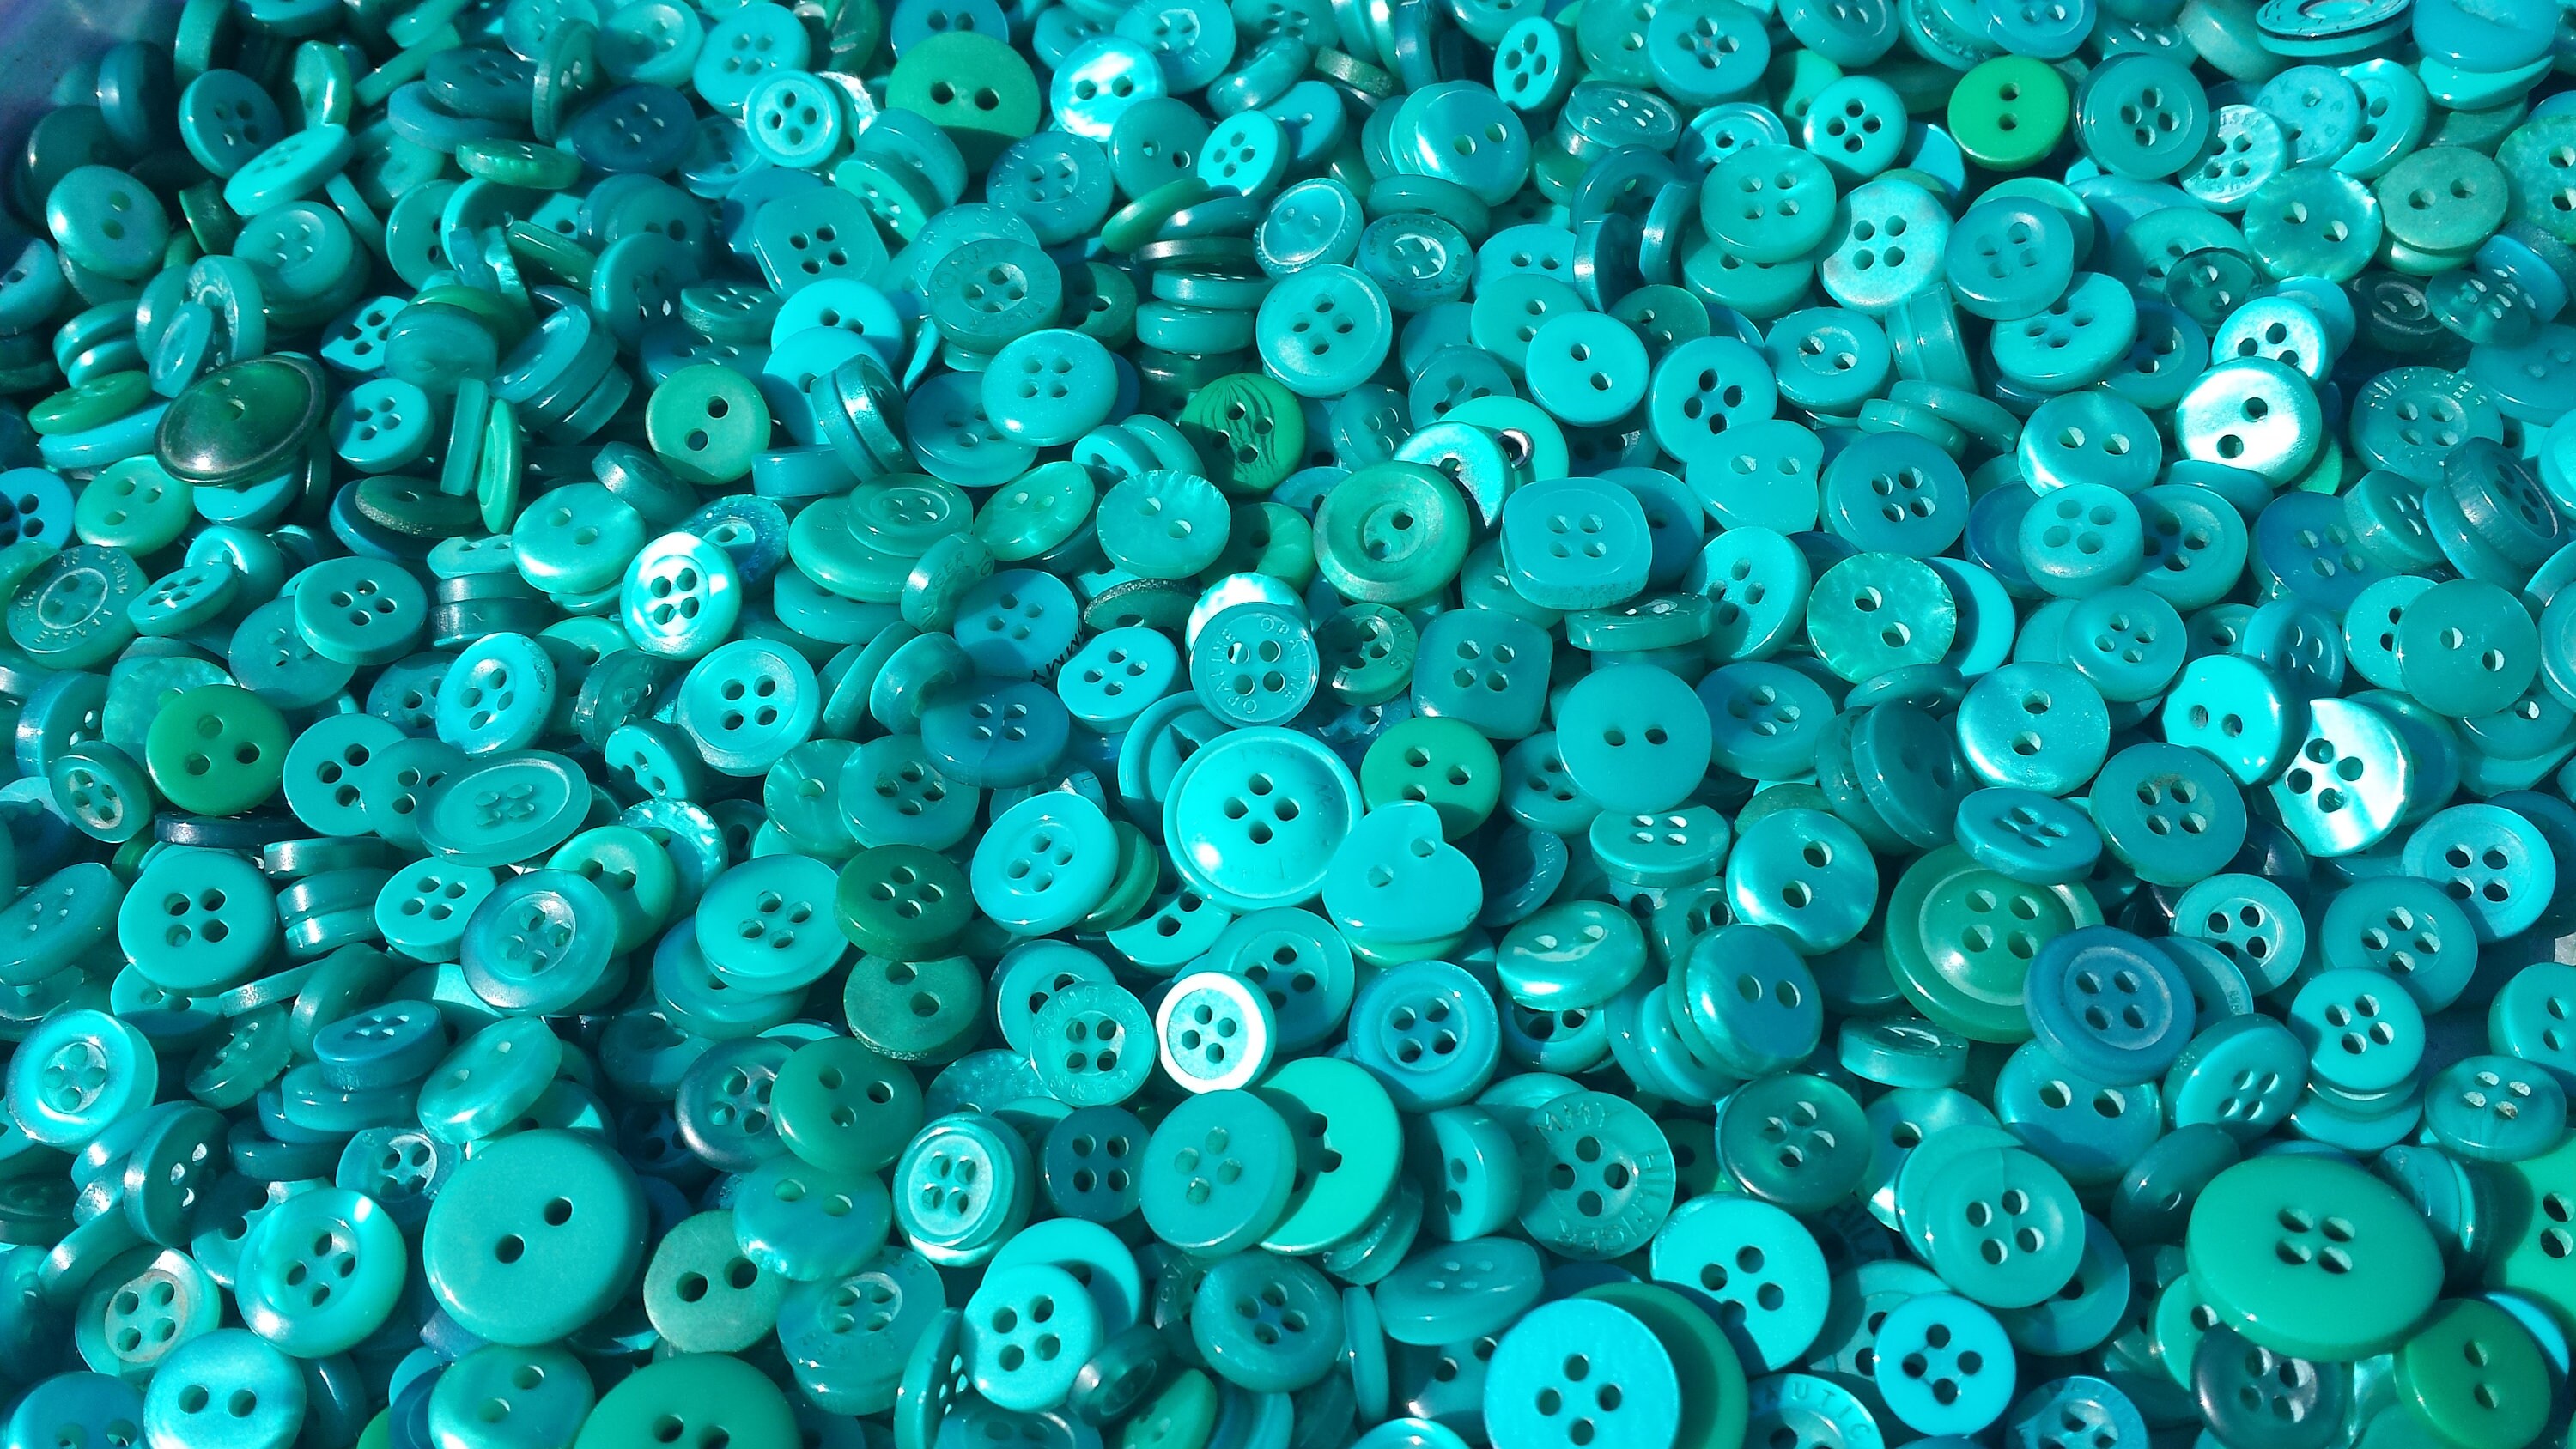 100 Small Blue Buttons, many small sizes, styles and shades of blue, random  bulk button pack, sizes 1/4 to 5/8